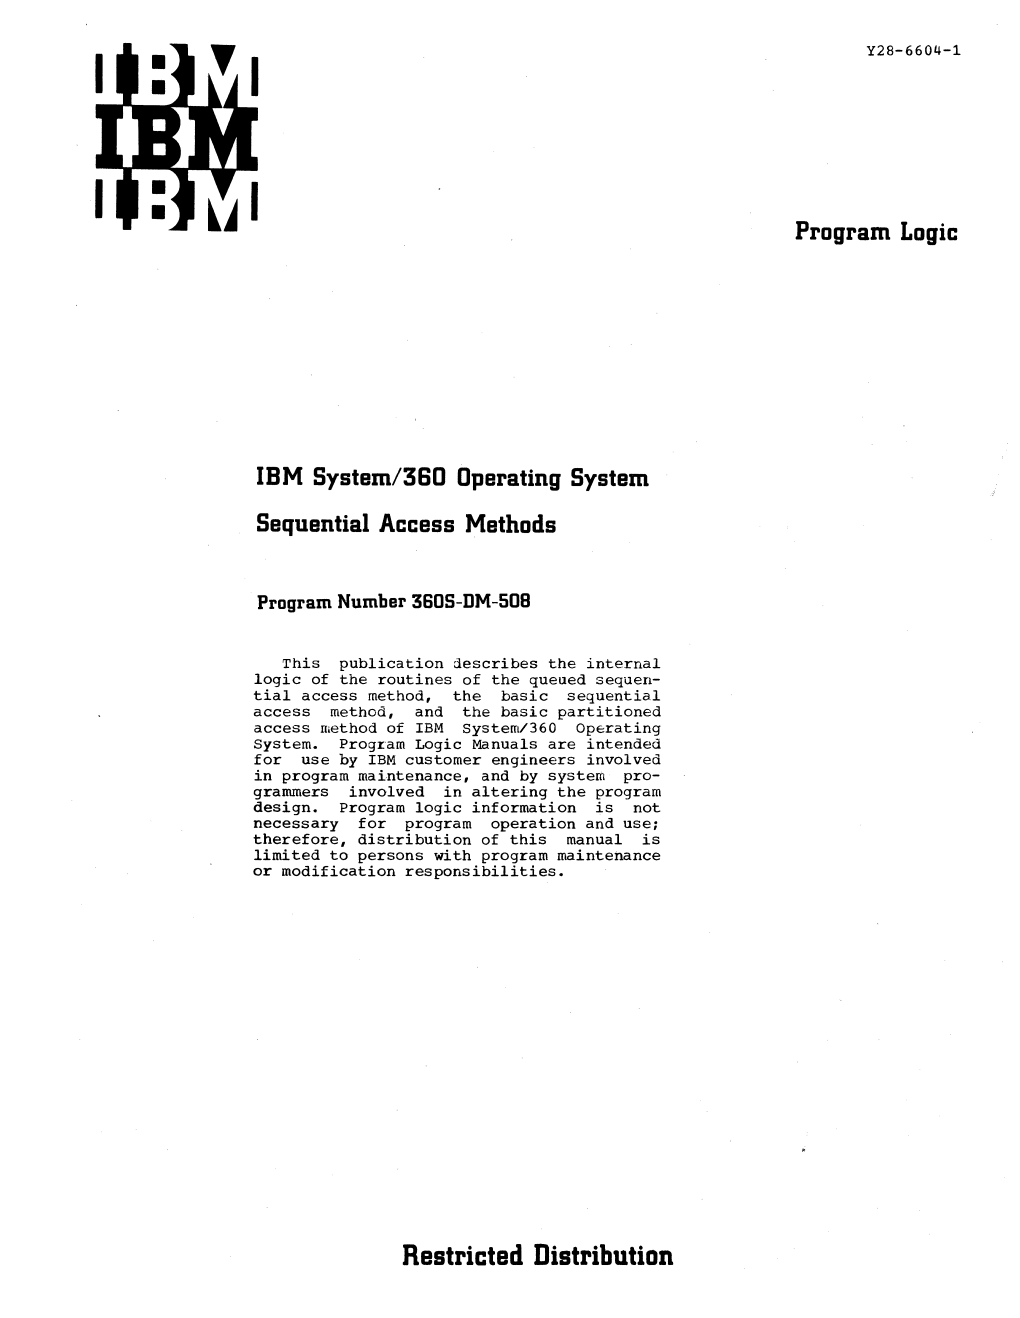 IBM System/360 Operating System Sequential Access Methods Program Logic Manual